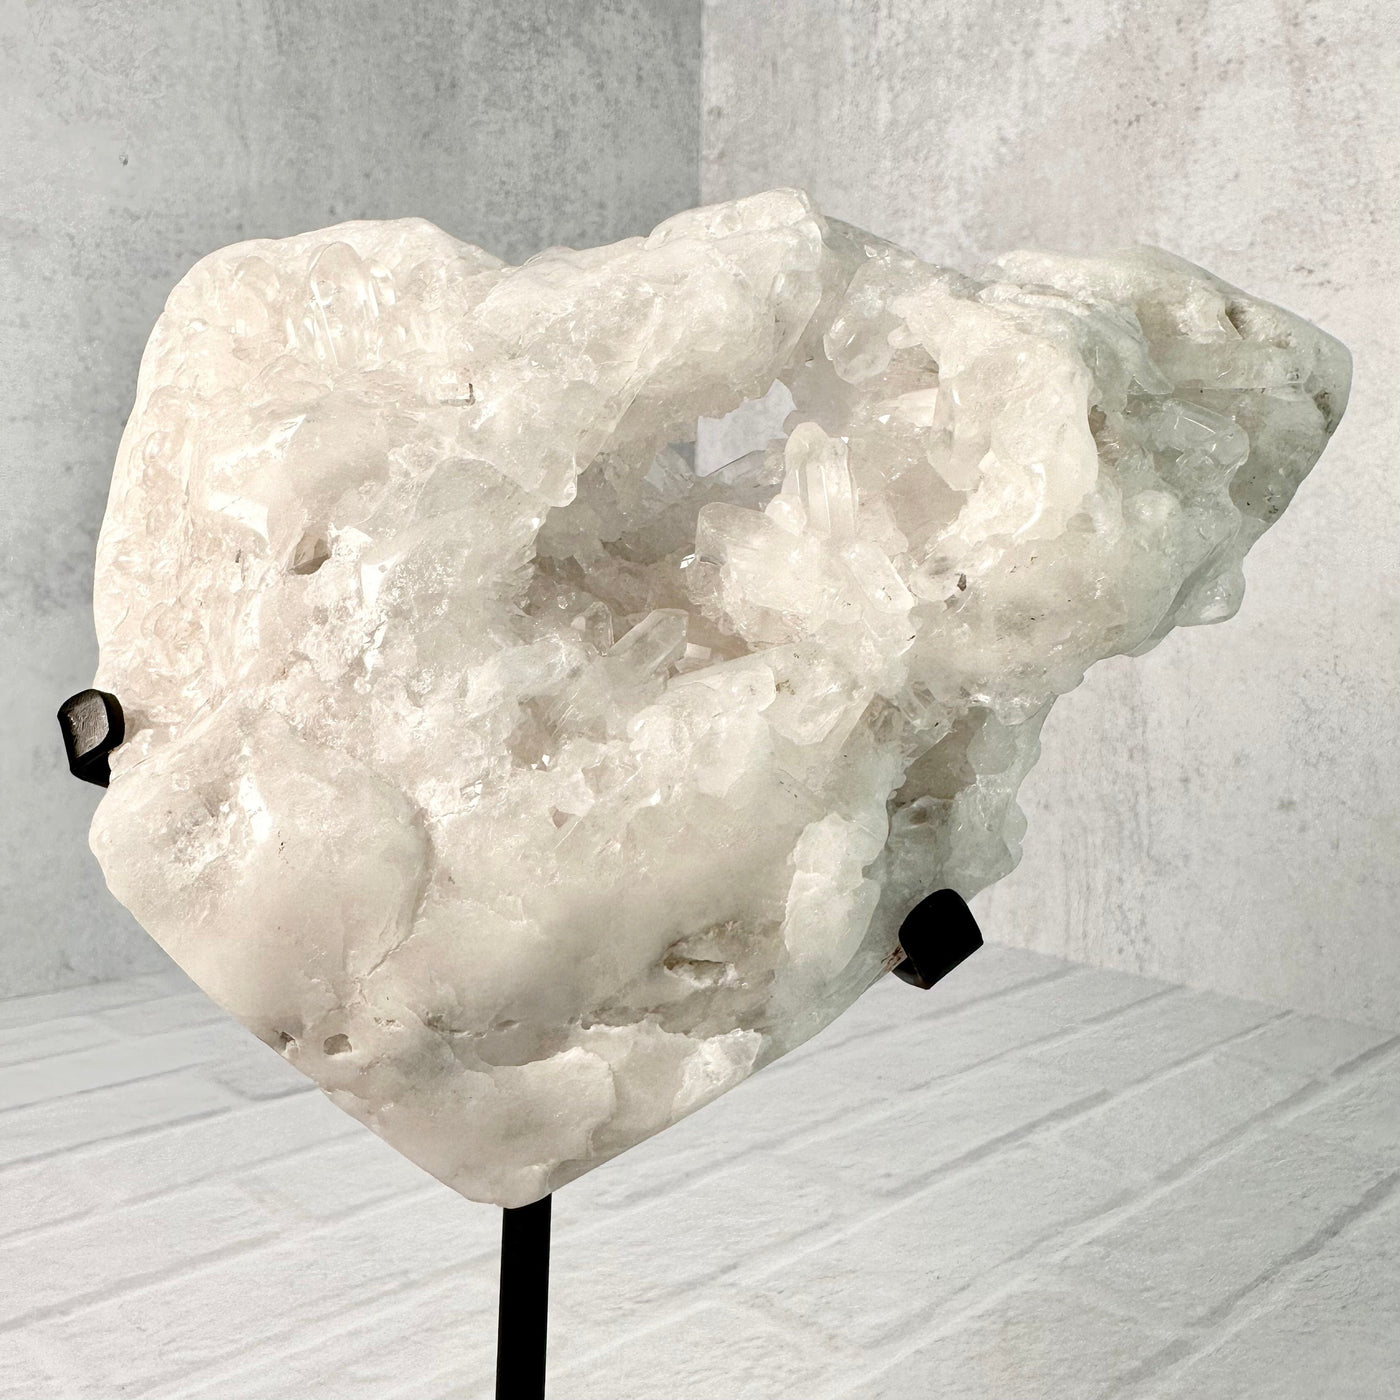 Up close frontal view of Crystal Quartz Cluster Heart on Metal Stand.